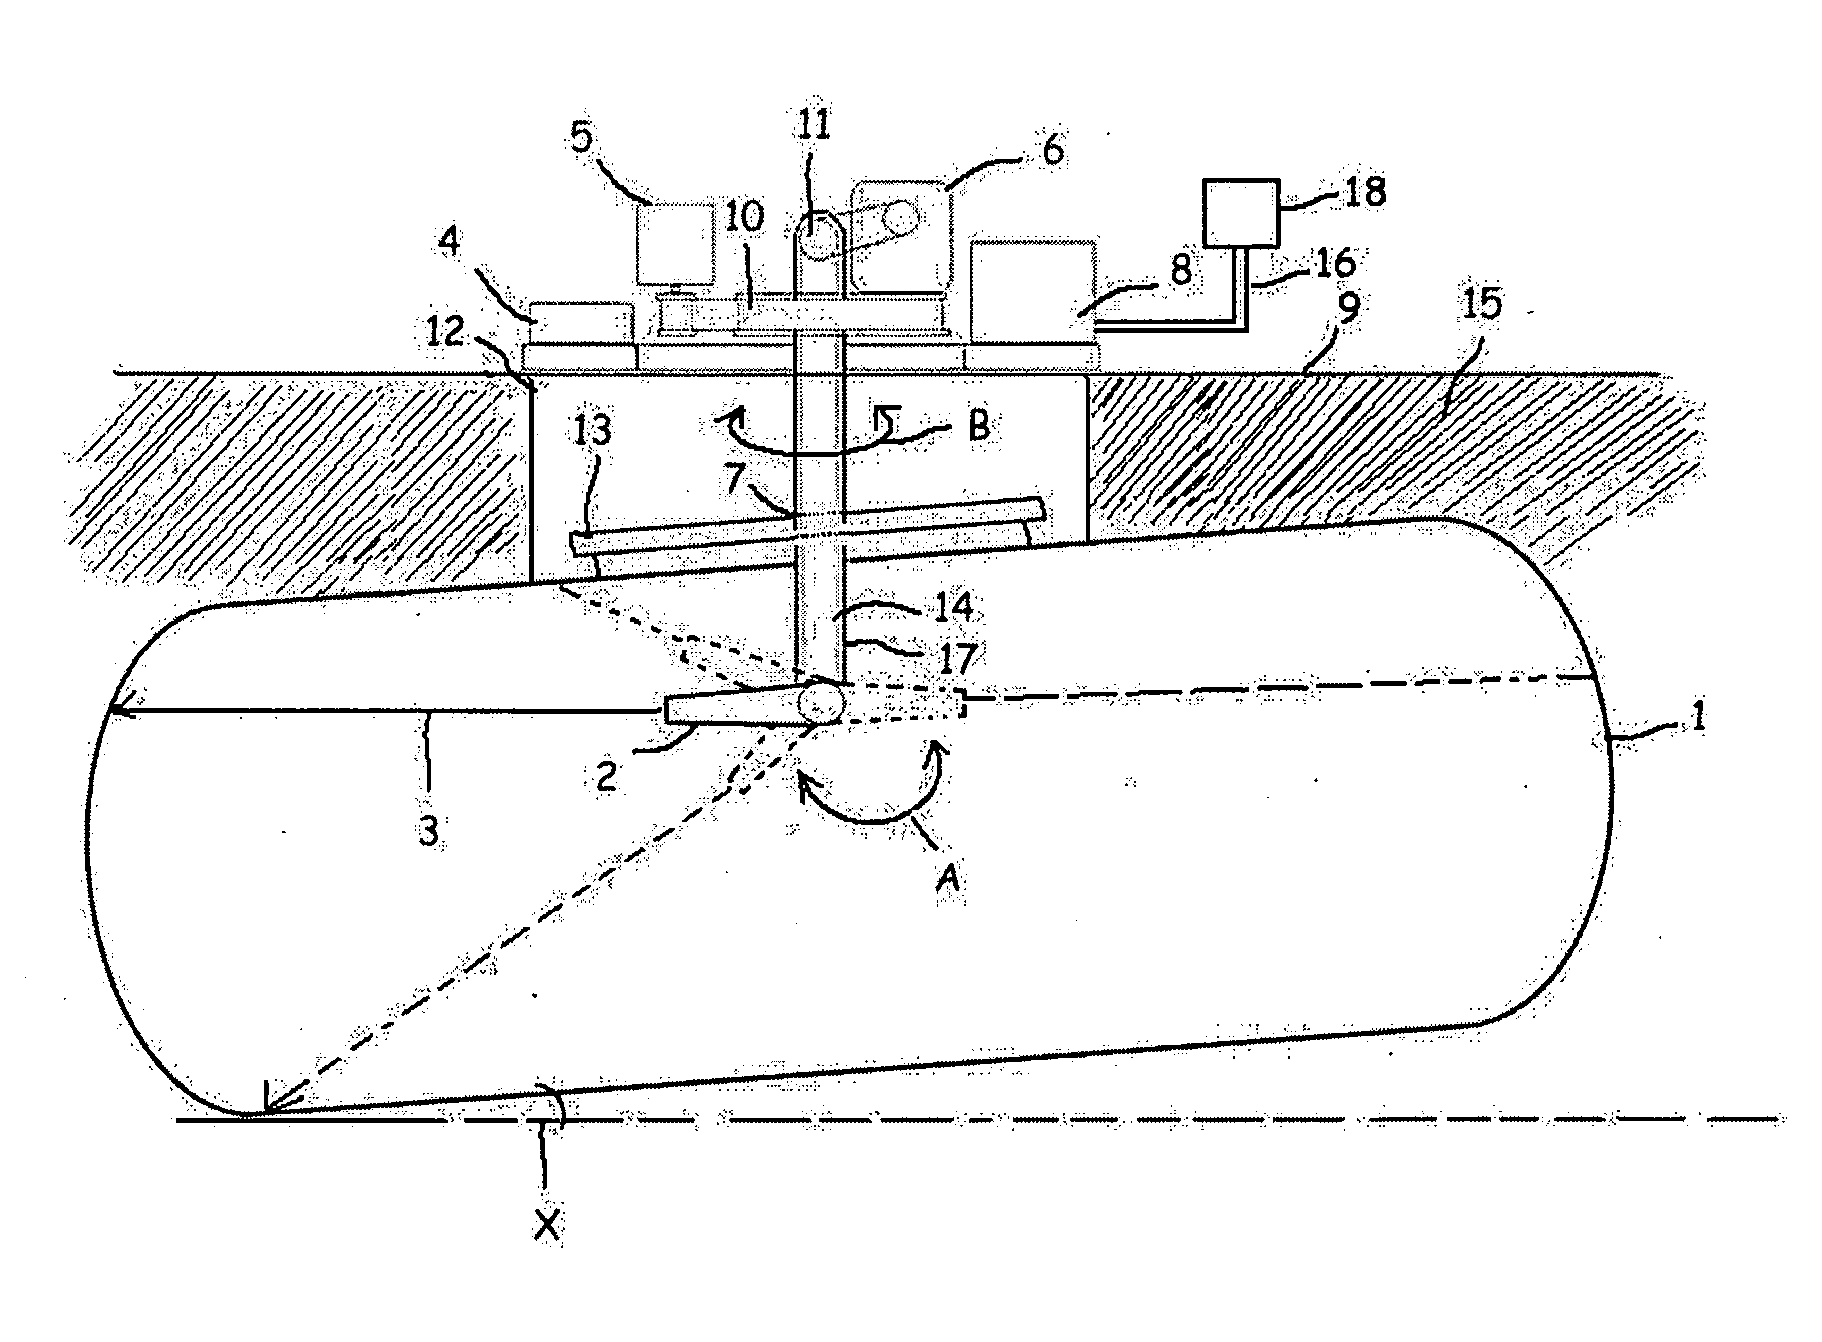 Method and Apparatus for Forming the Calibration Chart for the Underground Fuel Tanks